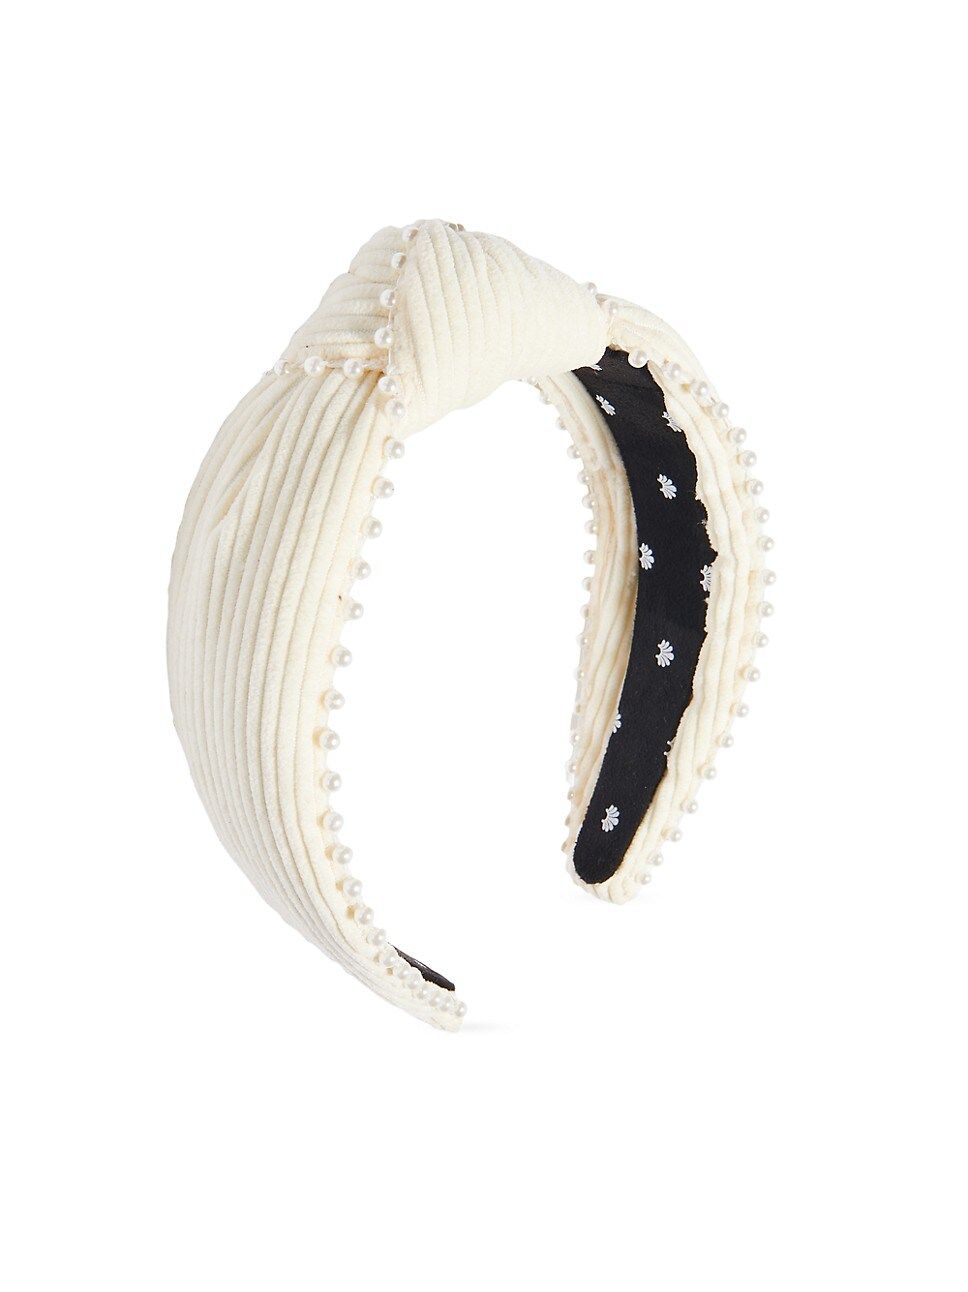 Pearl-Trimmed Corduroy Knotted Headband | Saks Fifth Avenue